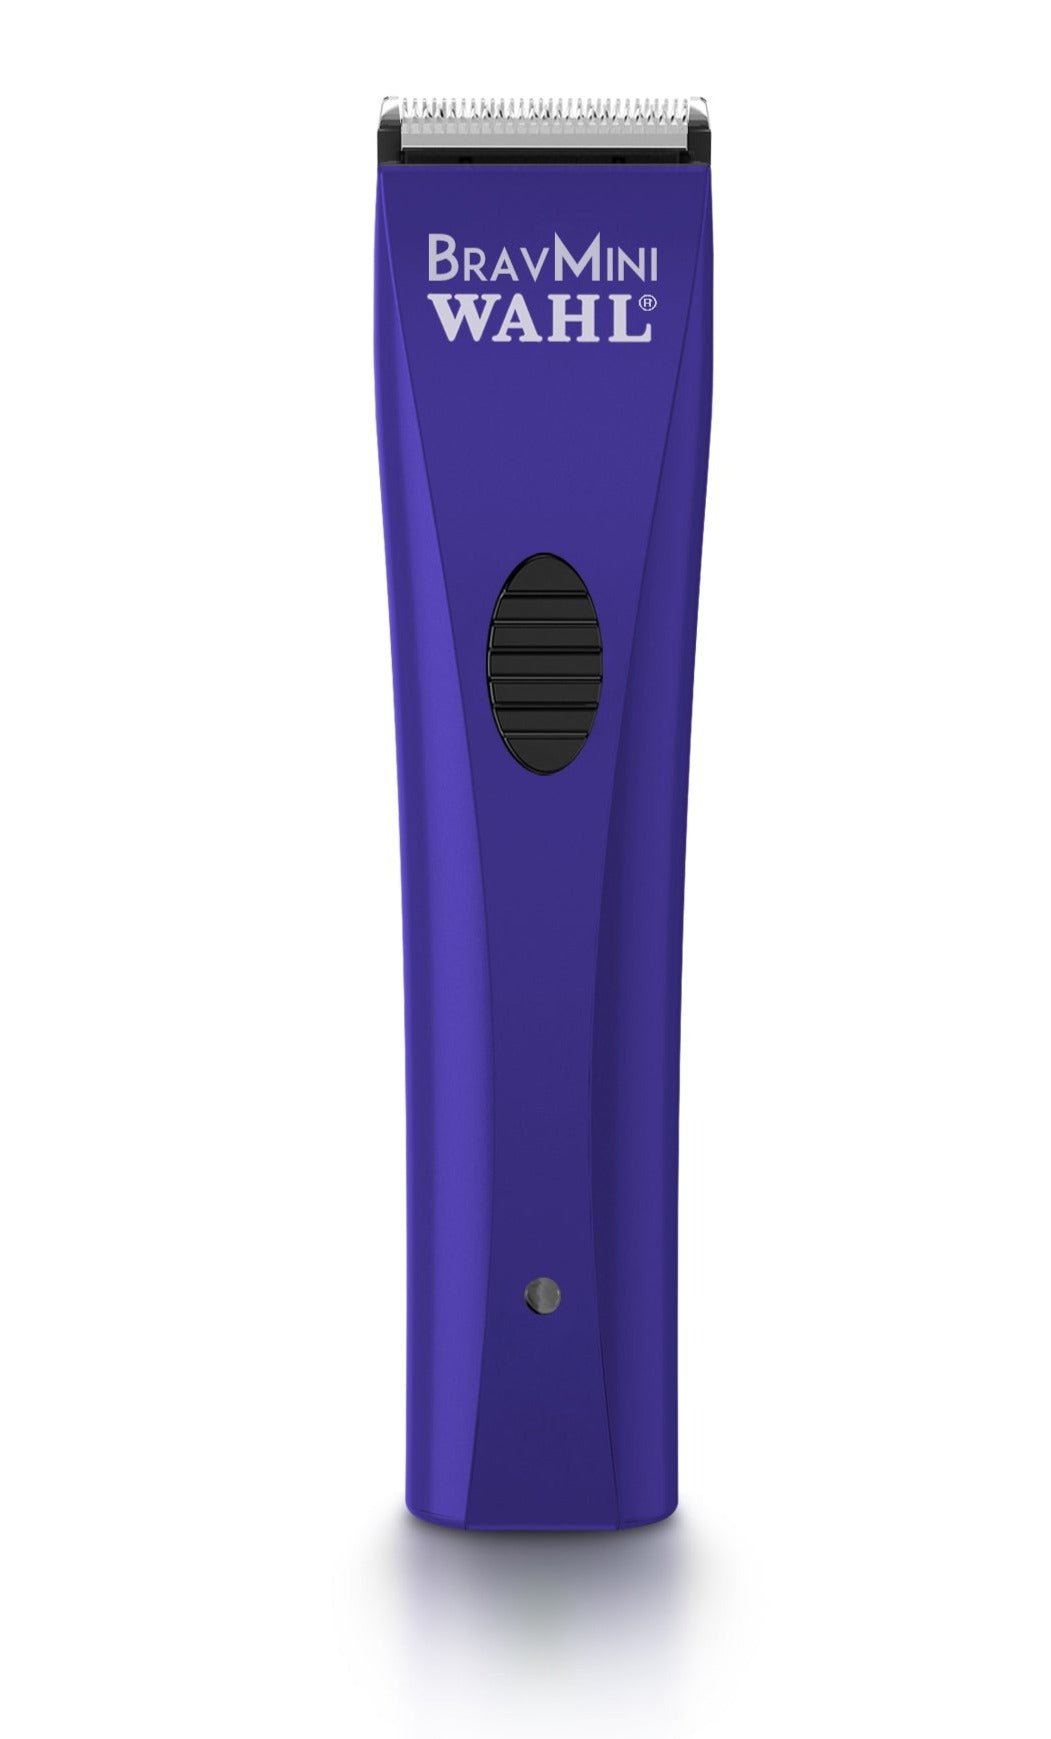 Wahl Brav Mini Quick Charge Trimmer formerly Wahl Bella - Royal Blue